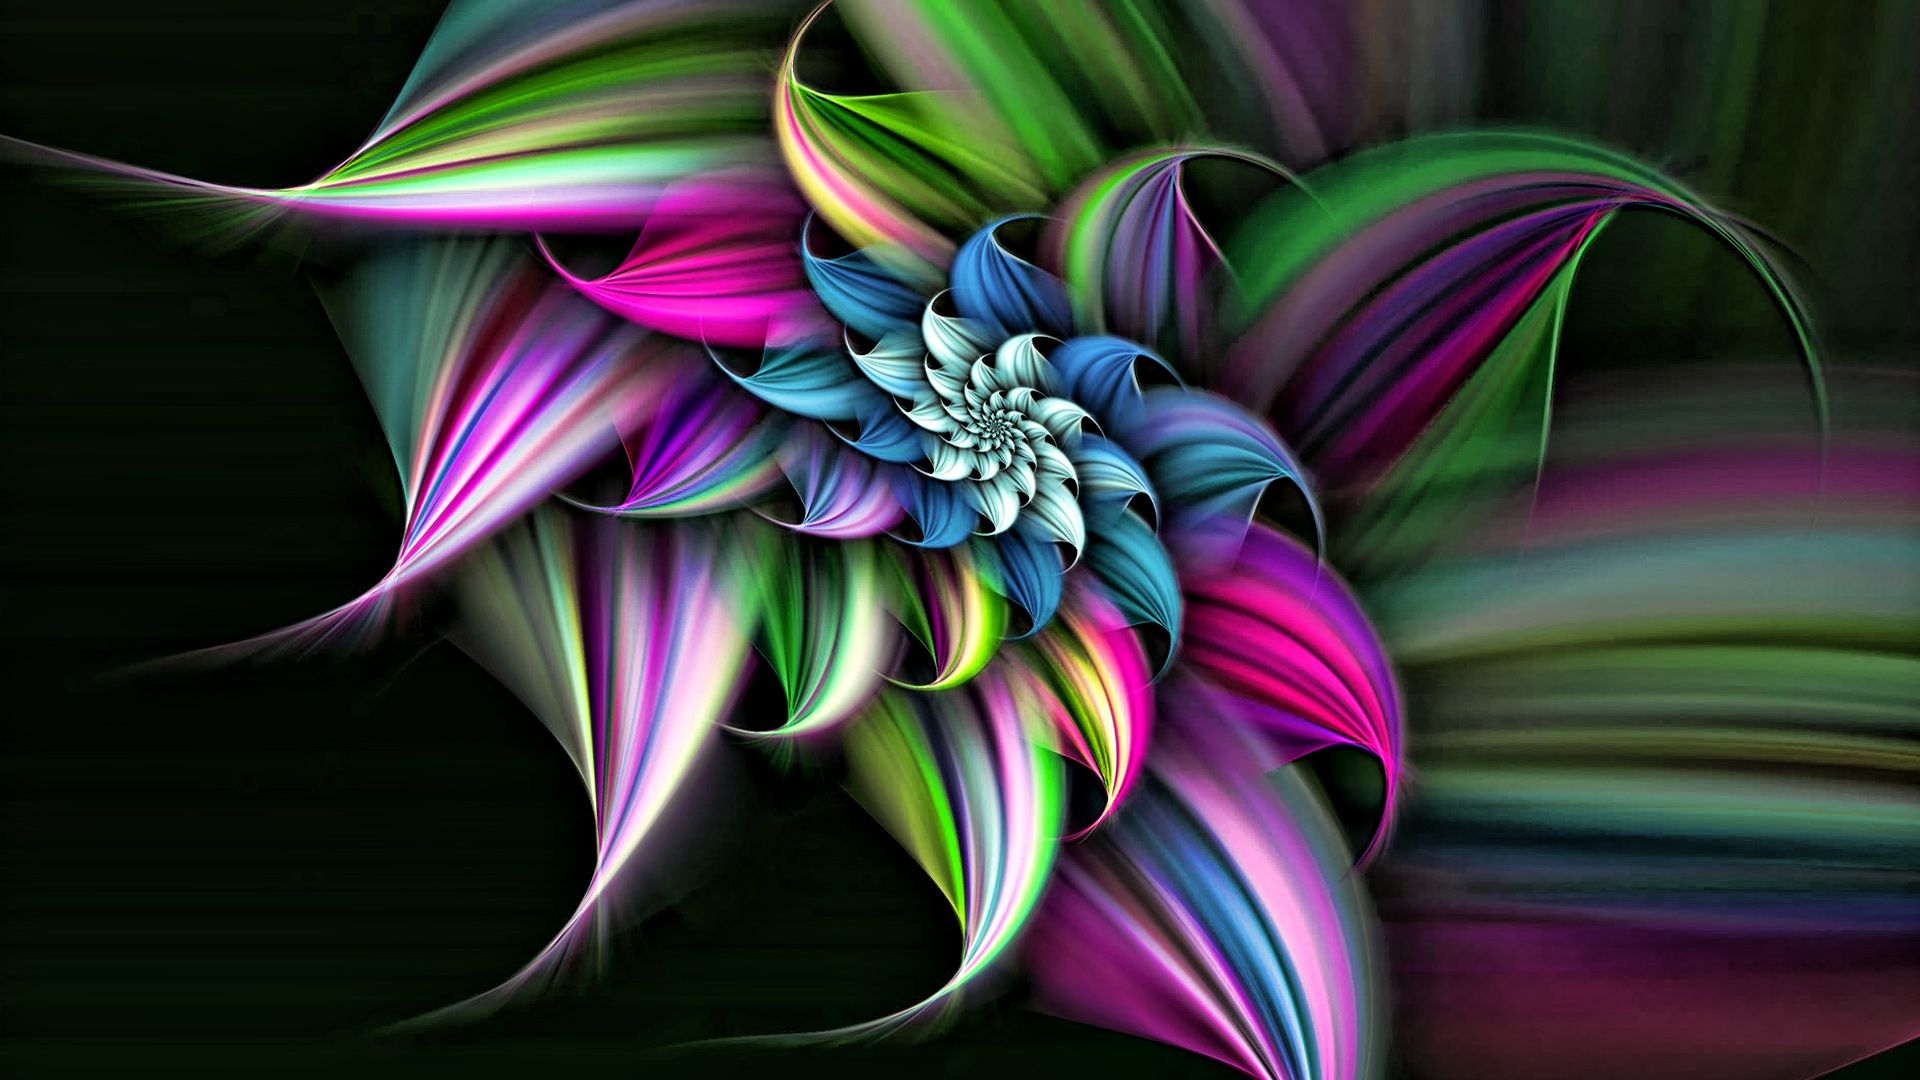 HD wallpaper, And, Abstract, And, Wide, Images, Wallpaper, 3D